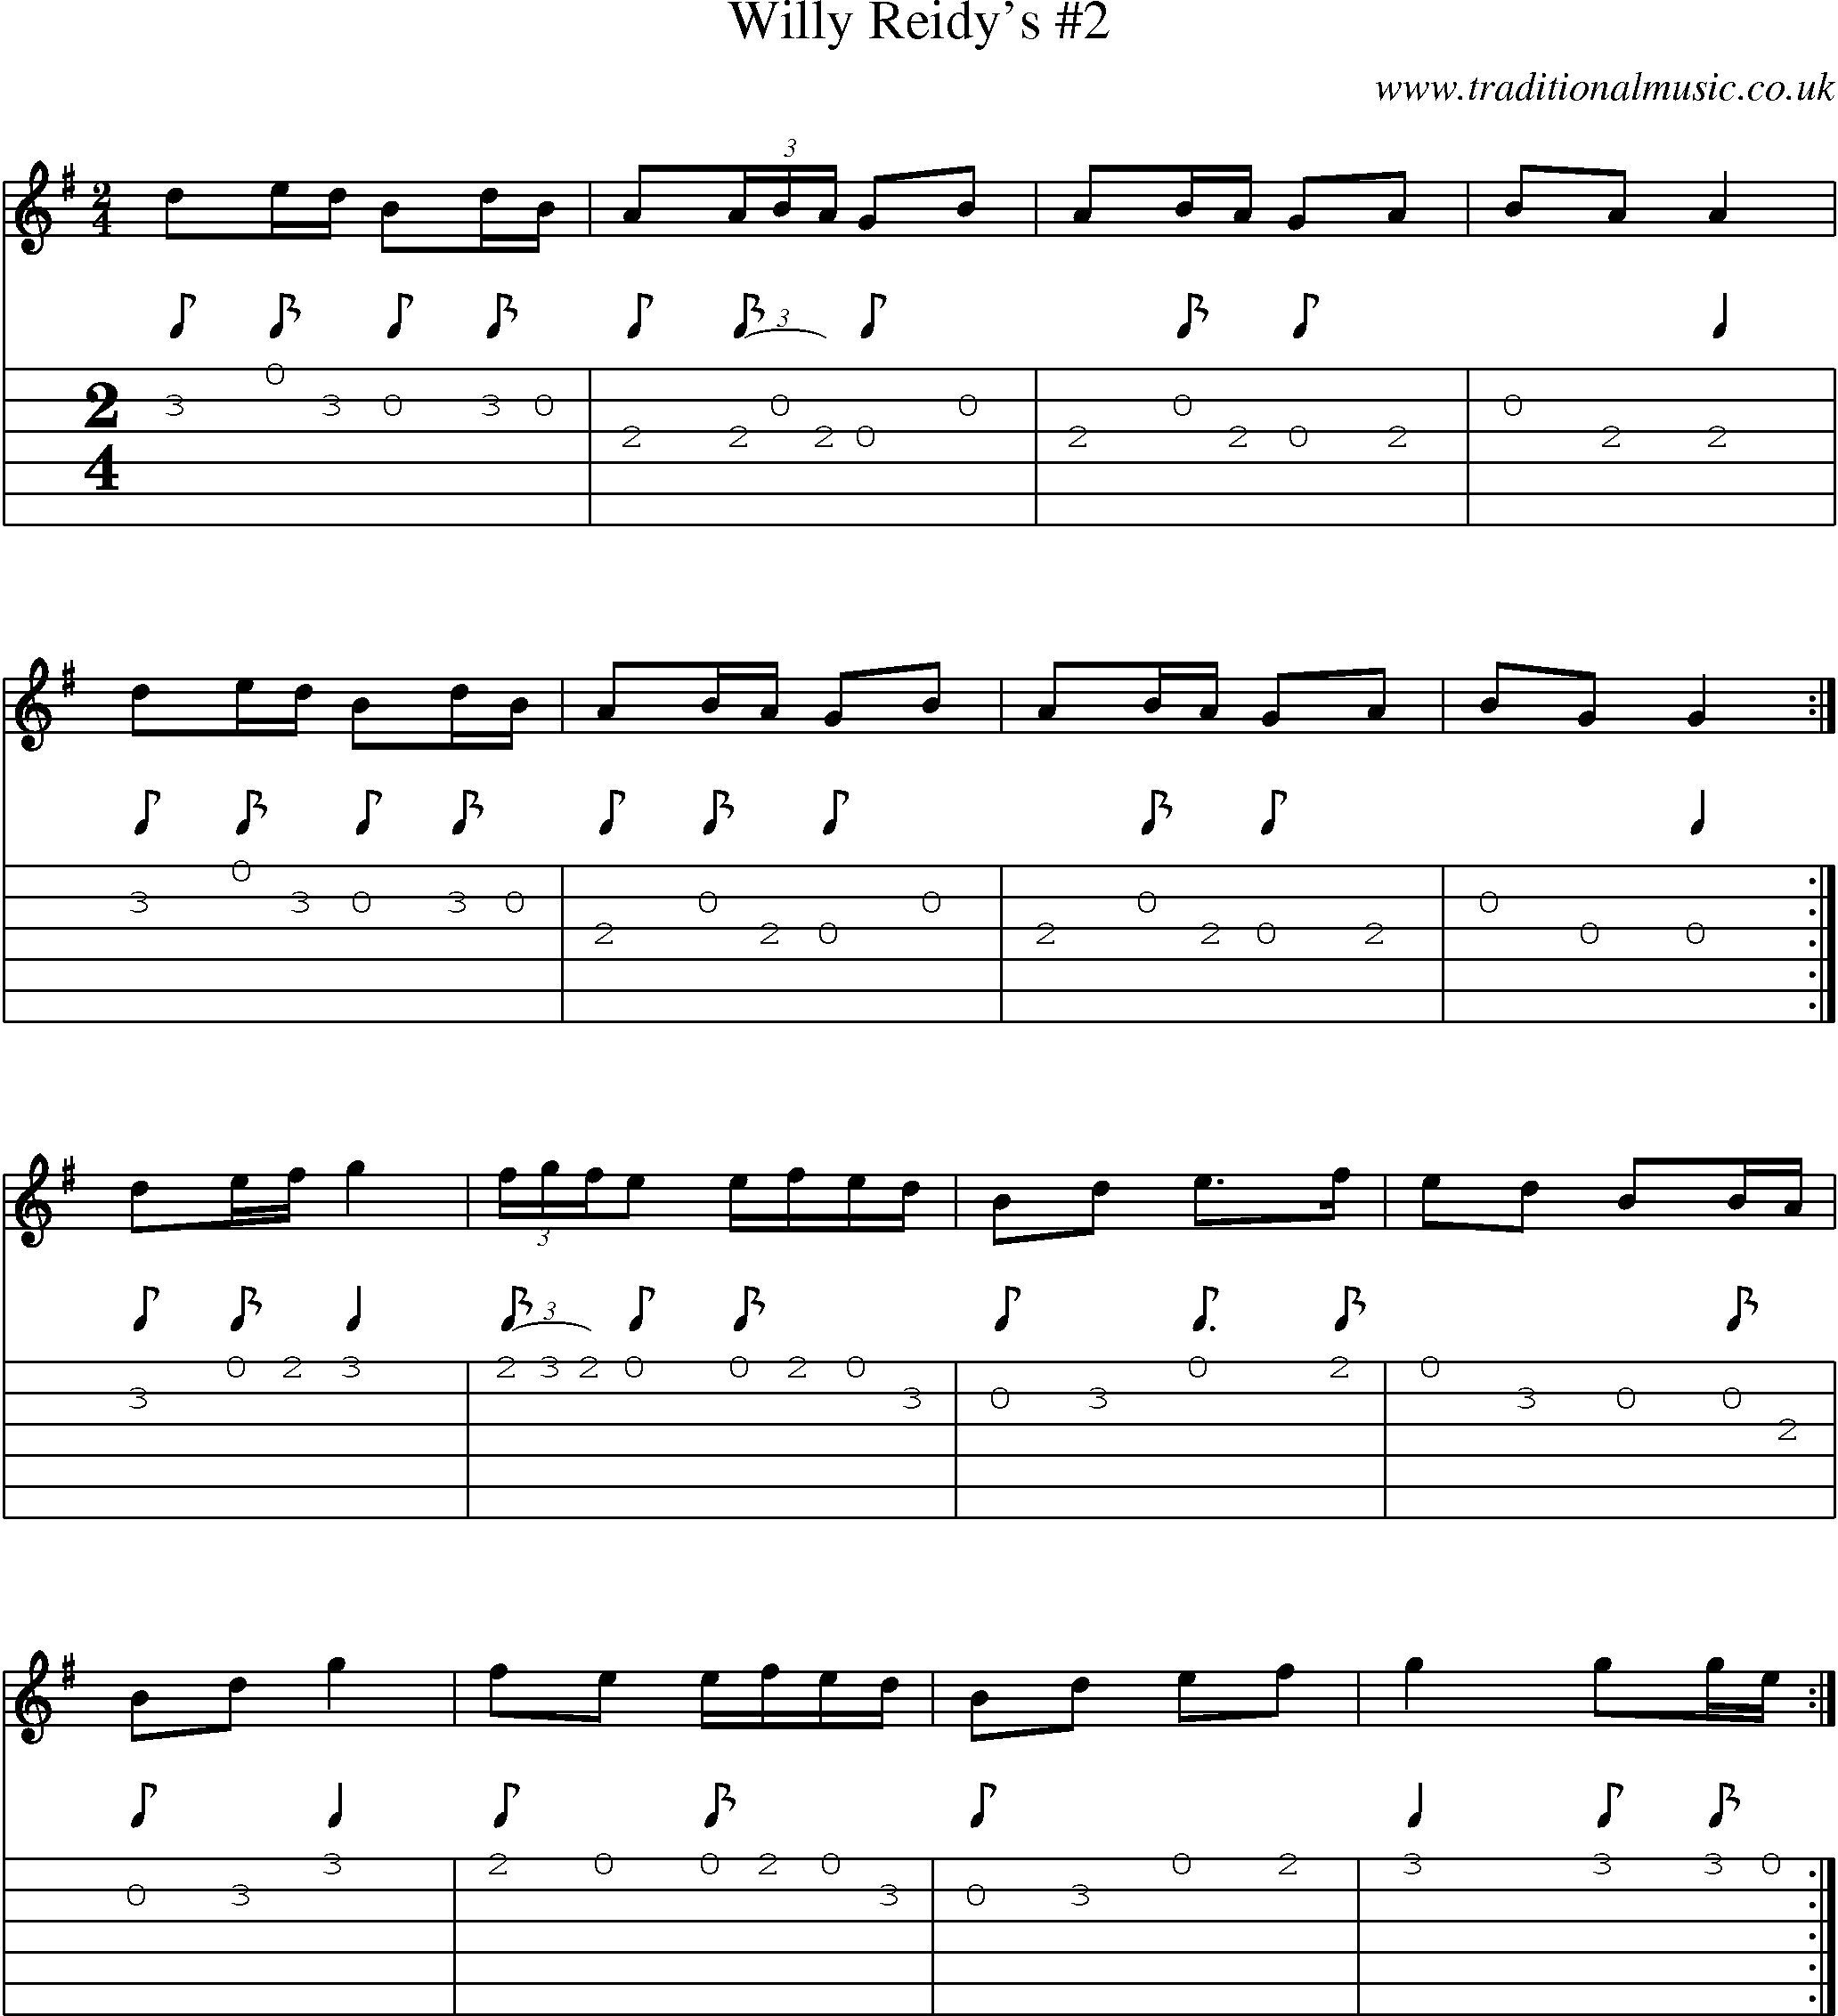 Music Score and Guitar Tabs for Willy Reidys 2